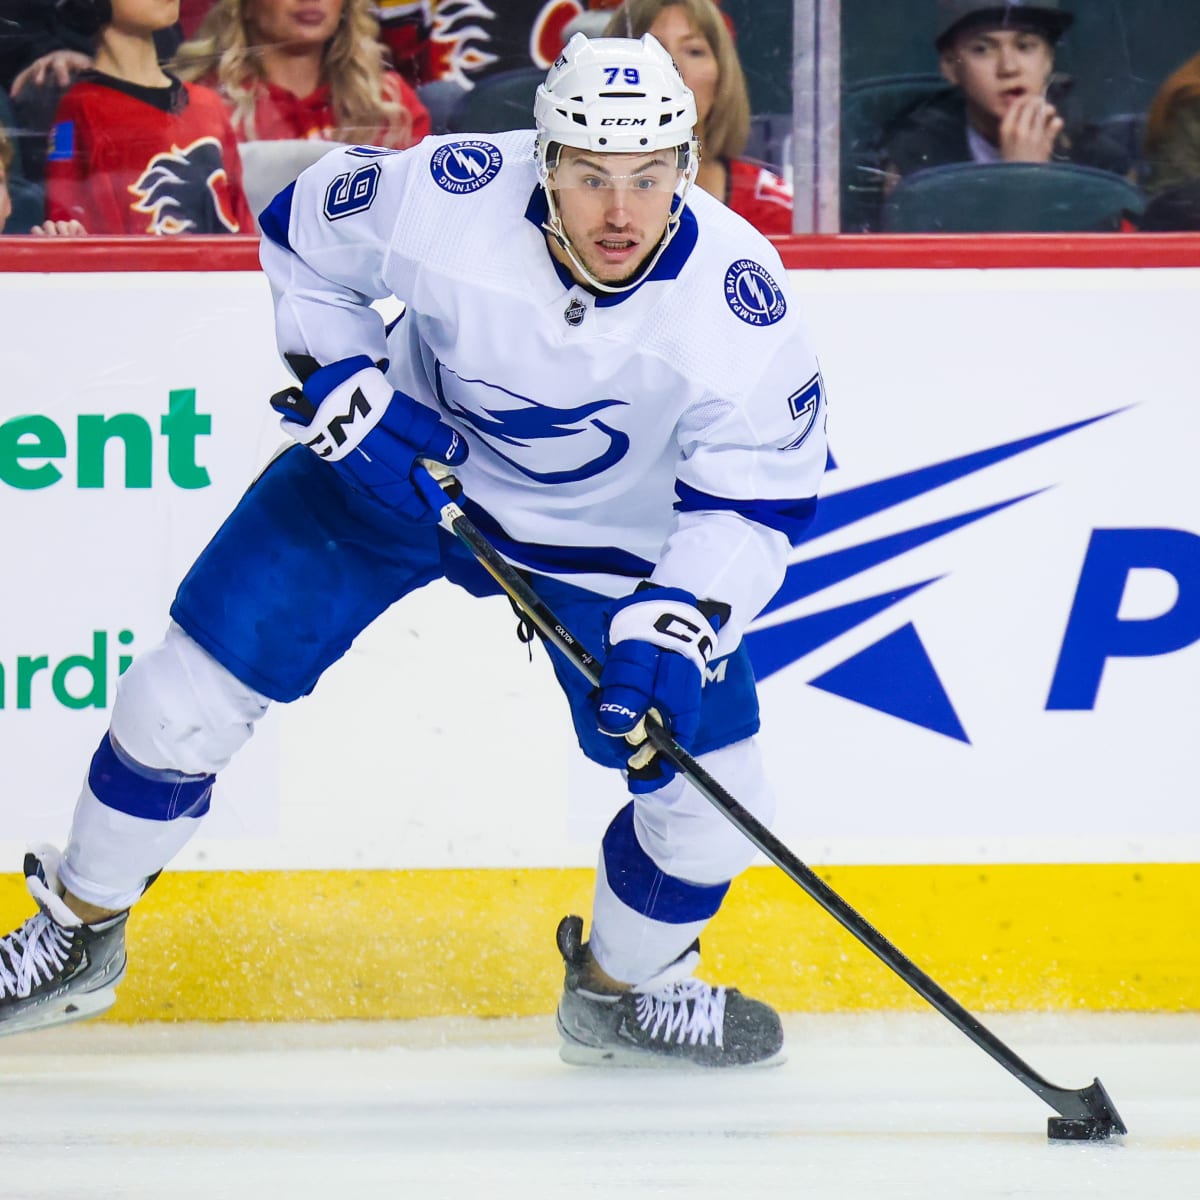 Avs trade for Lightning's Colton, expect to lose Compher